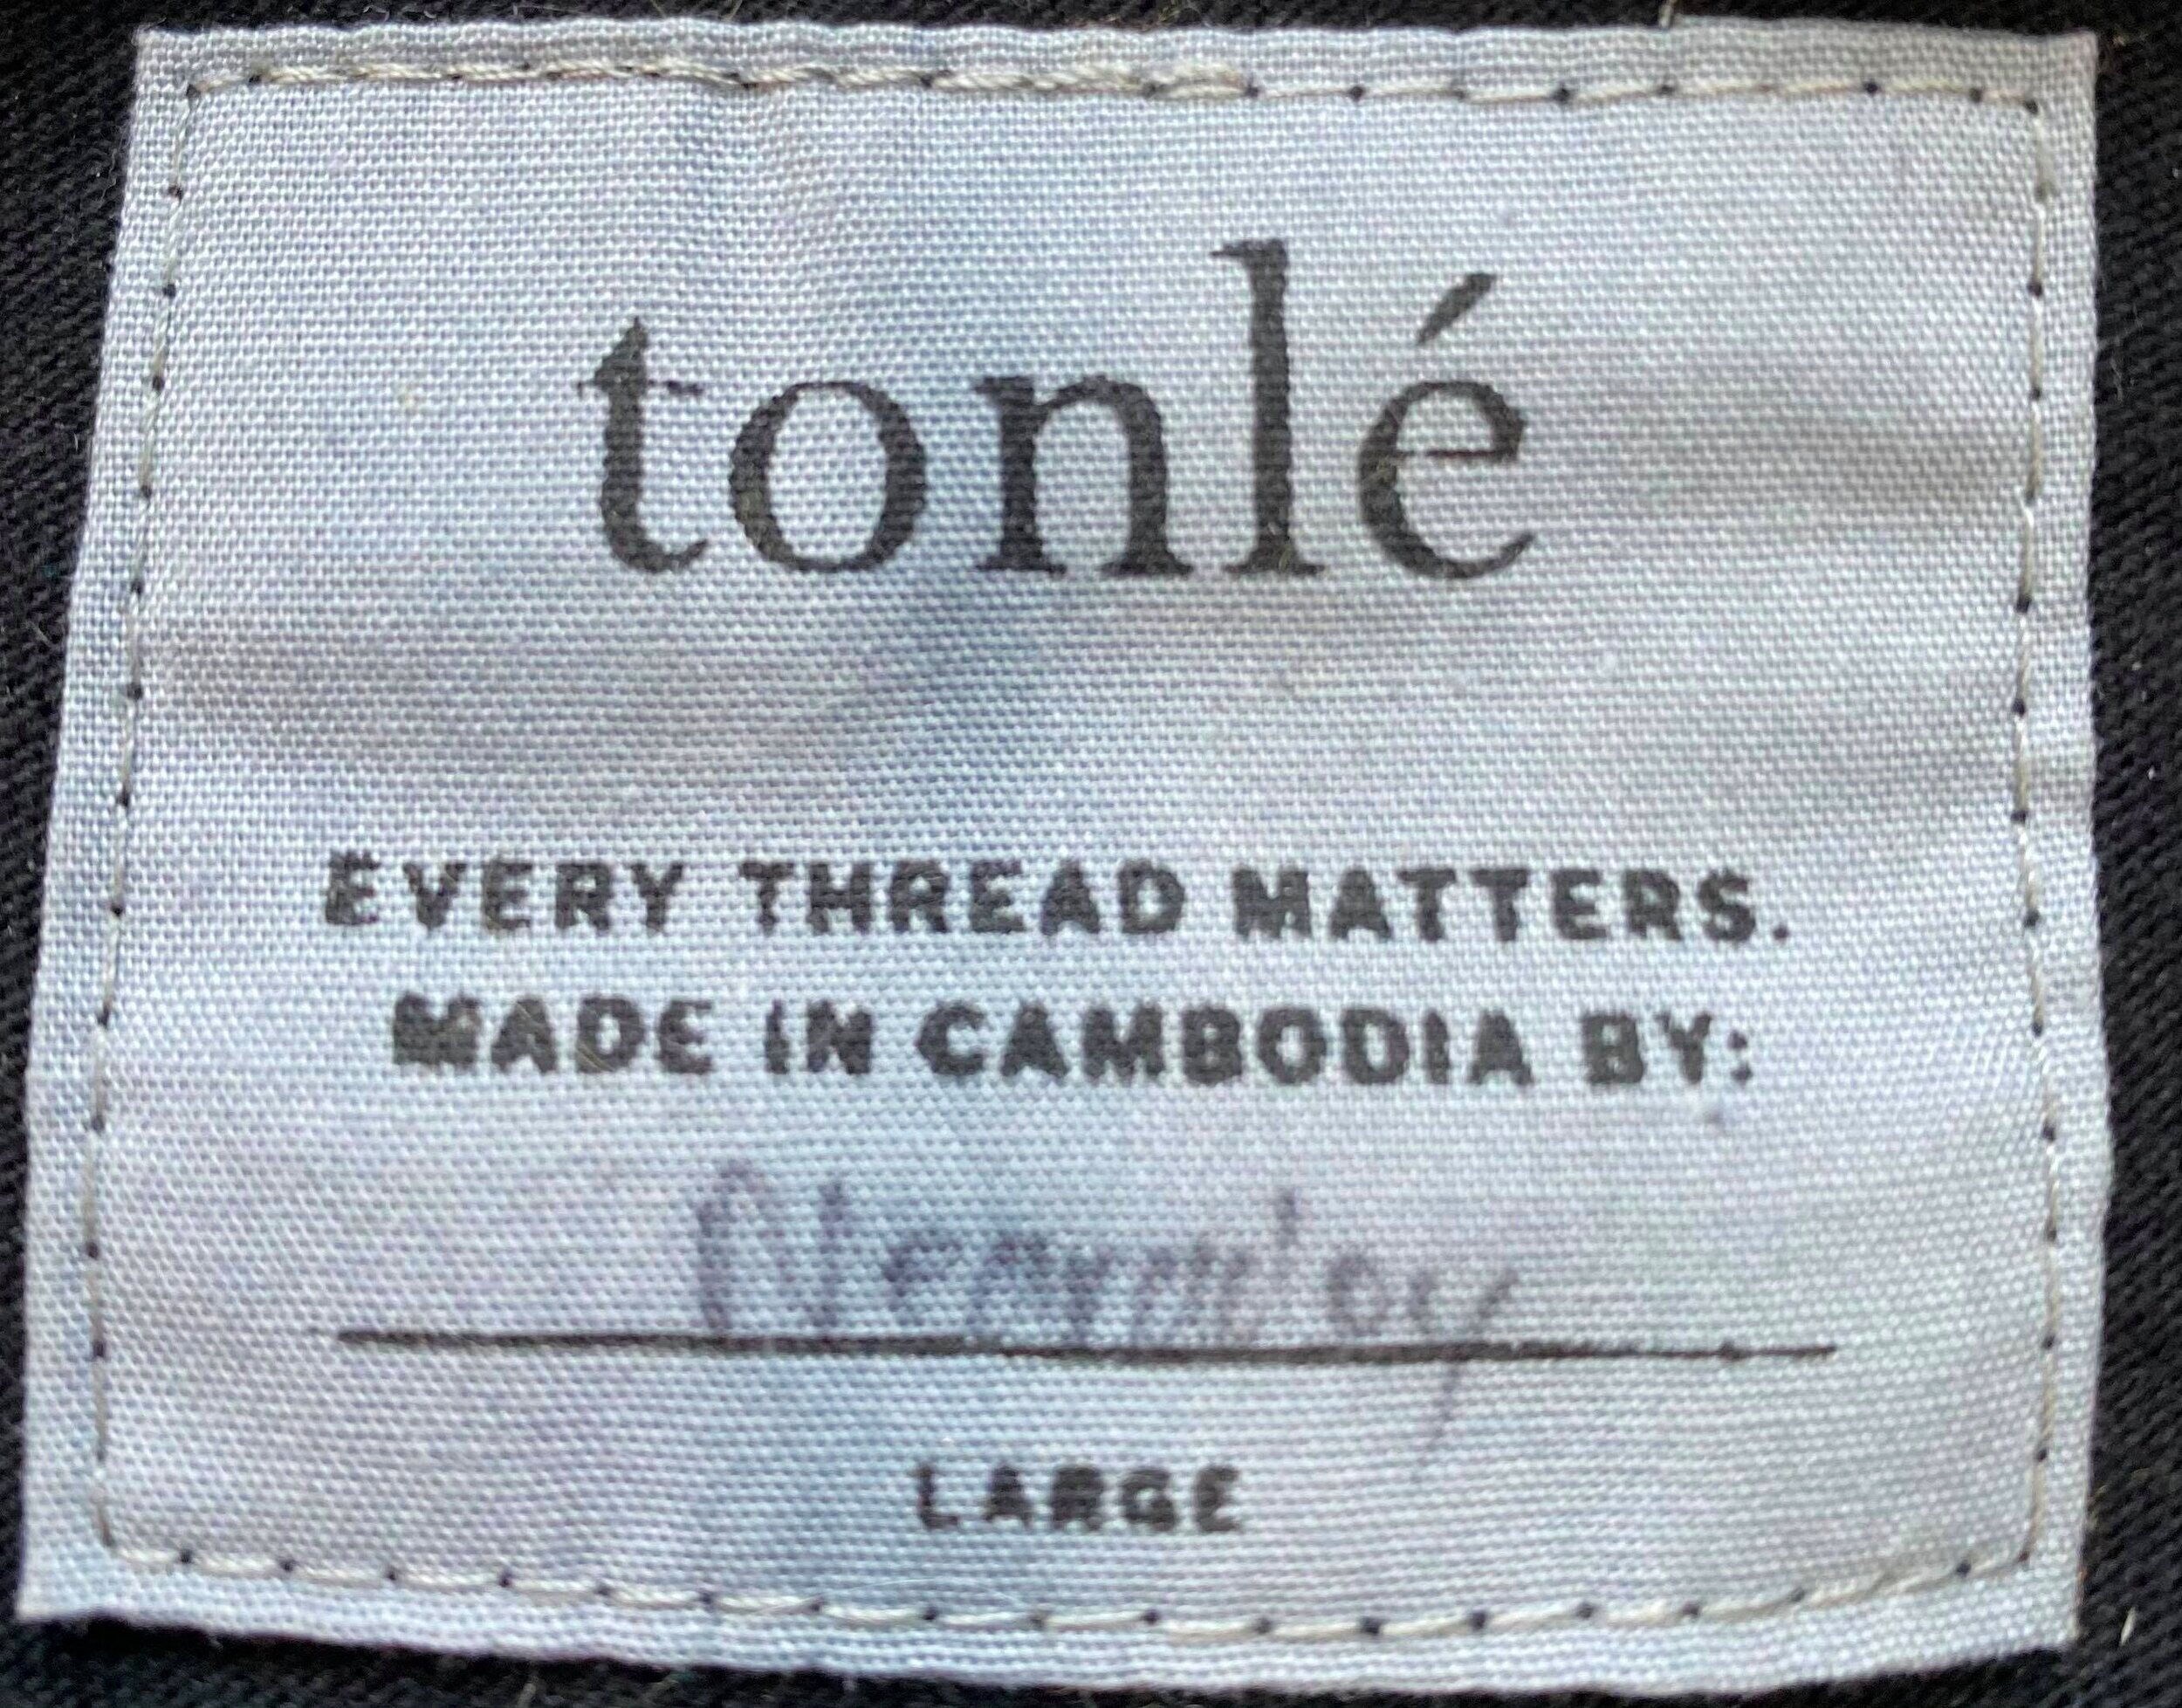 “Who made your clothes?”  A unique collection of clothing tags featuring the names of those who crafted the garment